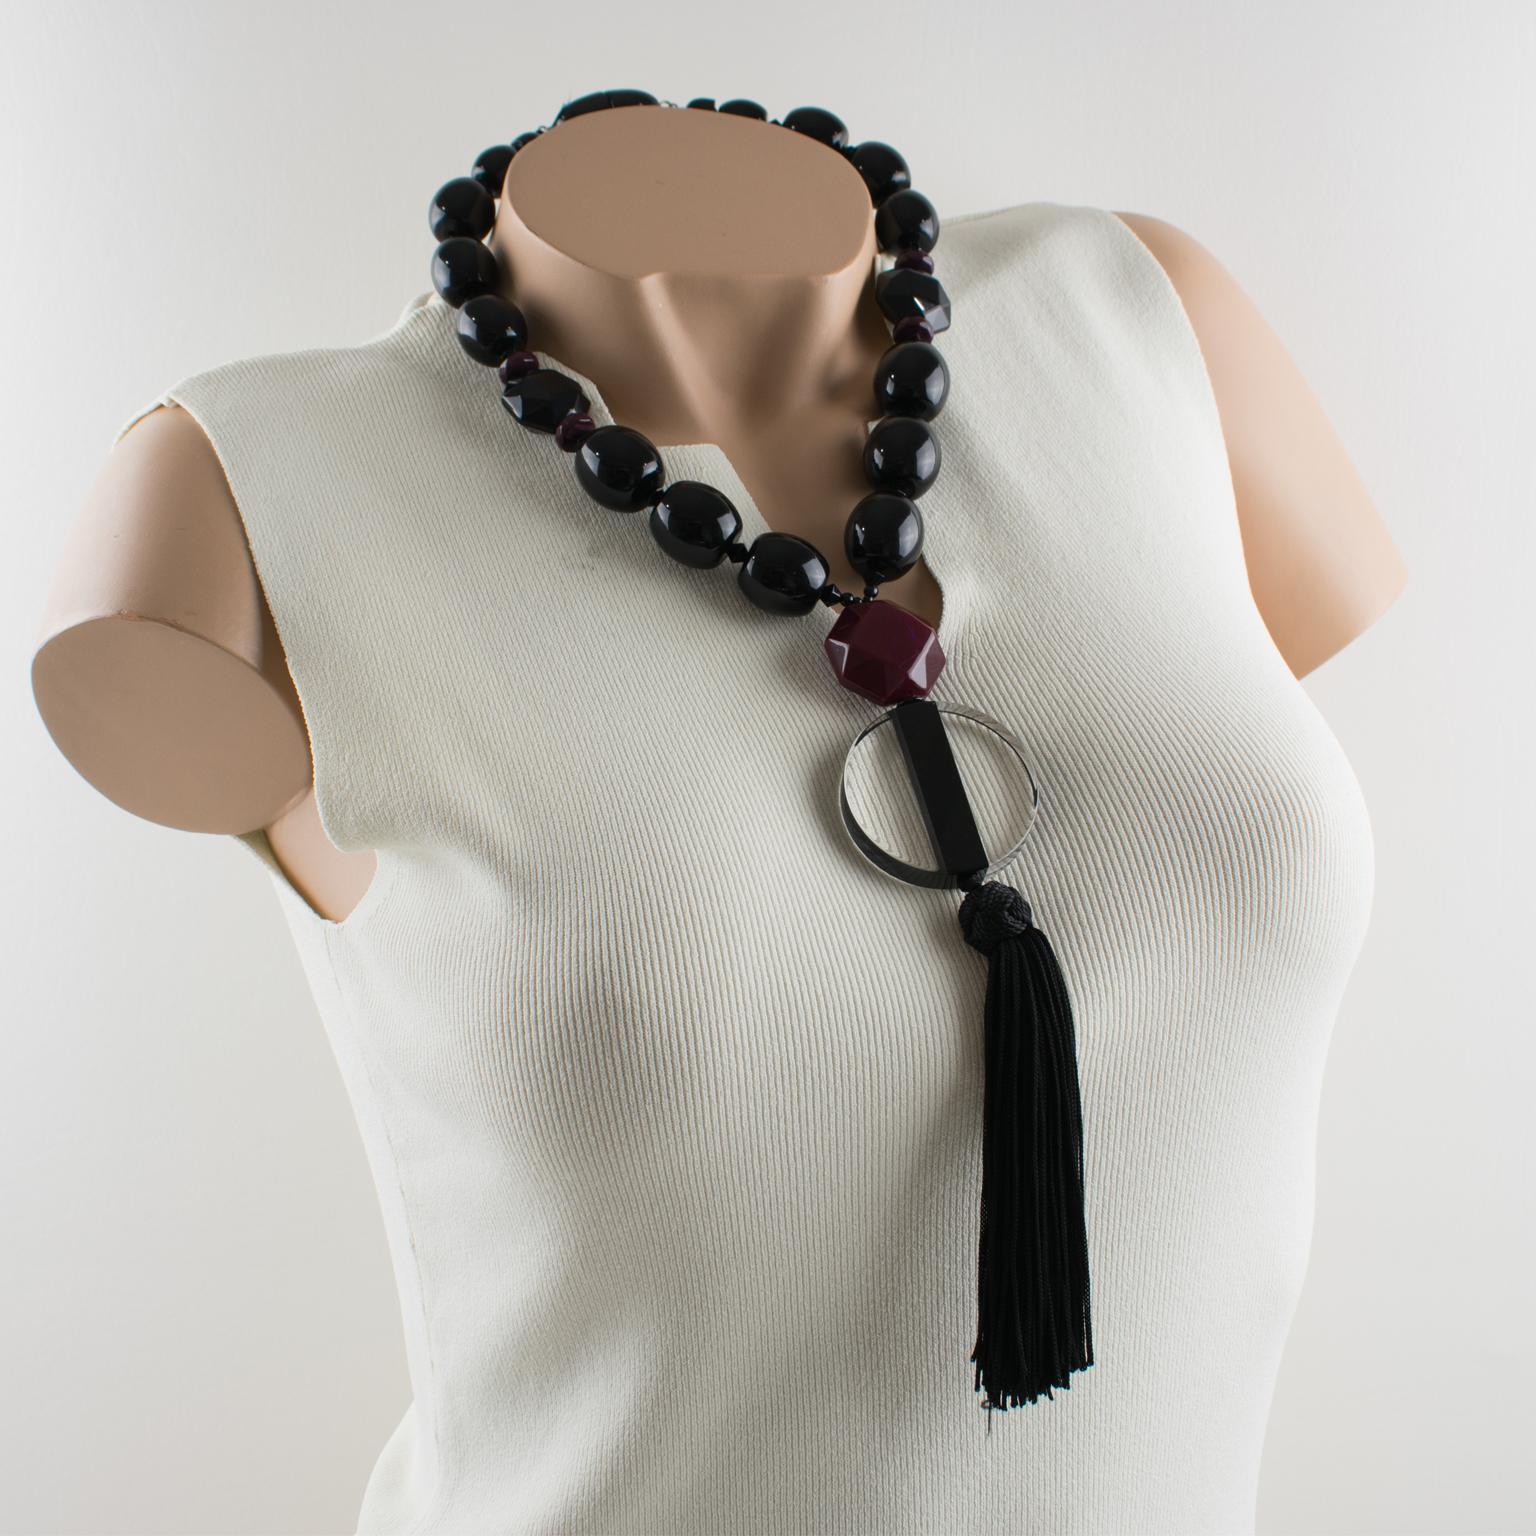 Refined Angela Caputi, made in Italy long beaded necklace. This flapper-style necklace has an Art-Deco-inspired design built with black resin beads complimented with purple grape faceted spacers and ornate with a Lucite pendant. The pendant starts